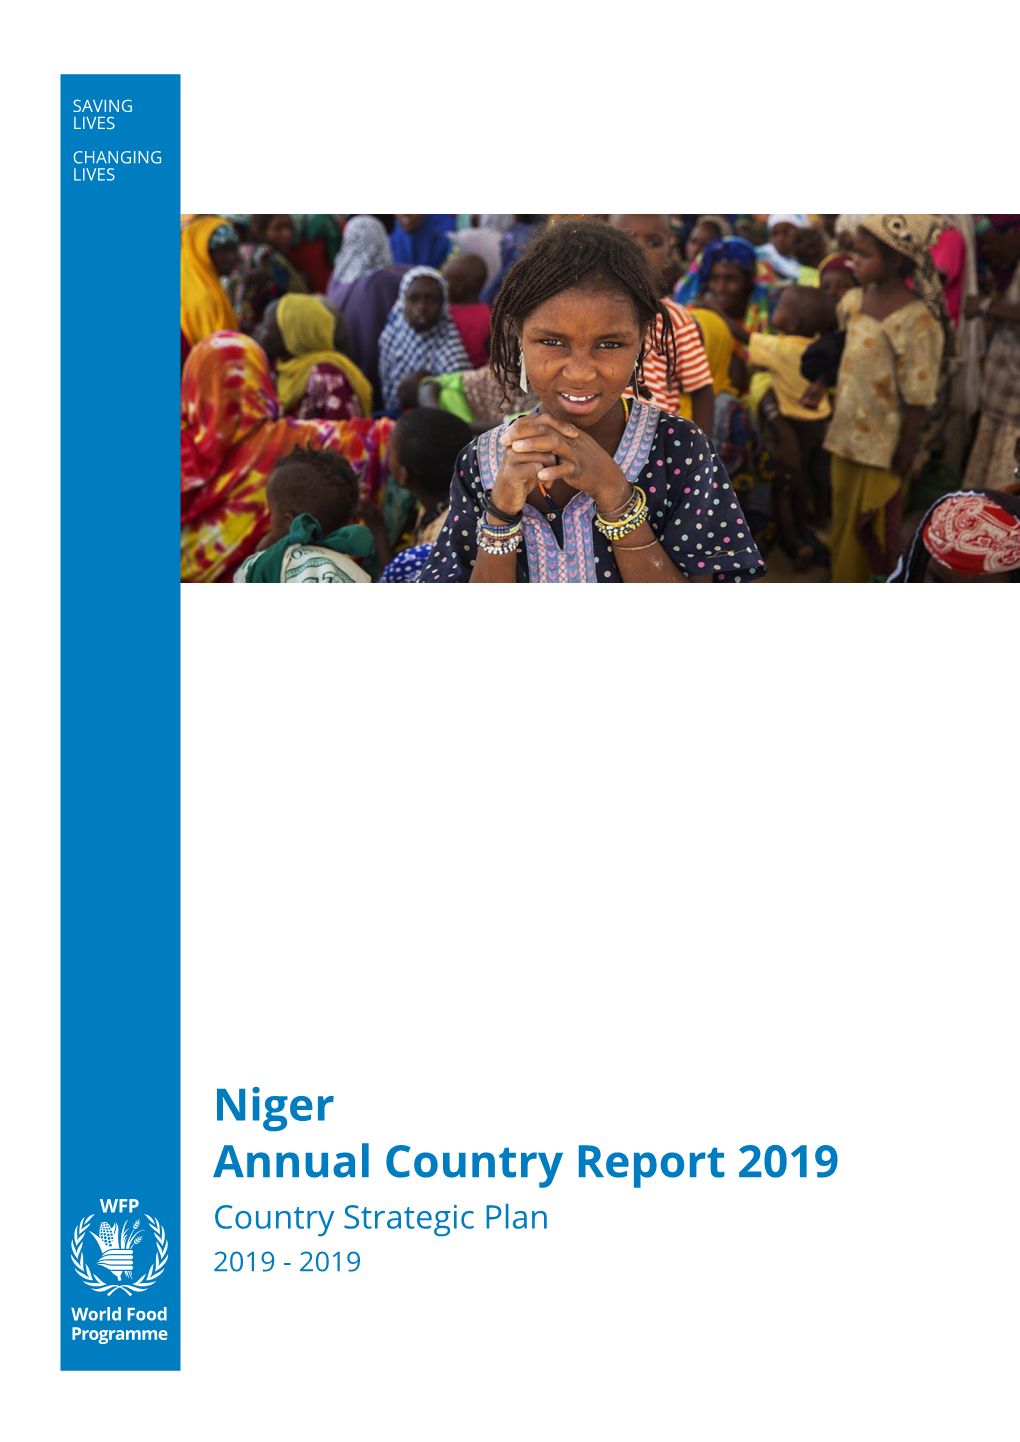 Niger Annual Country Report 2019 Country Strategic Plan 2019 - 2019 Table of Contents